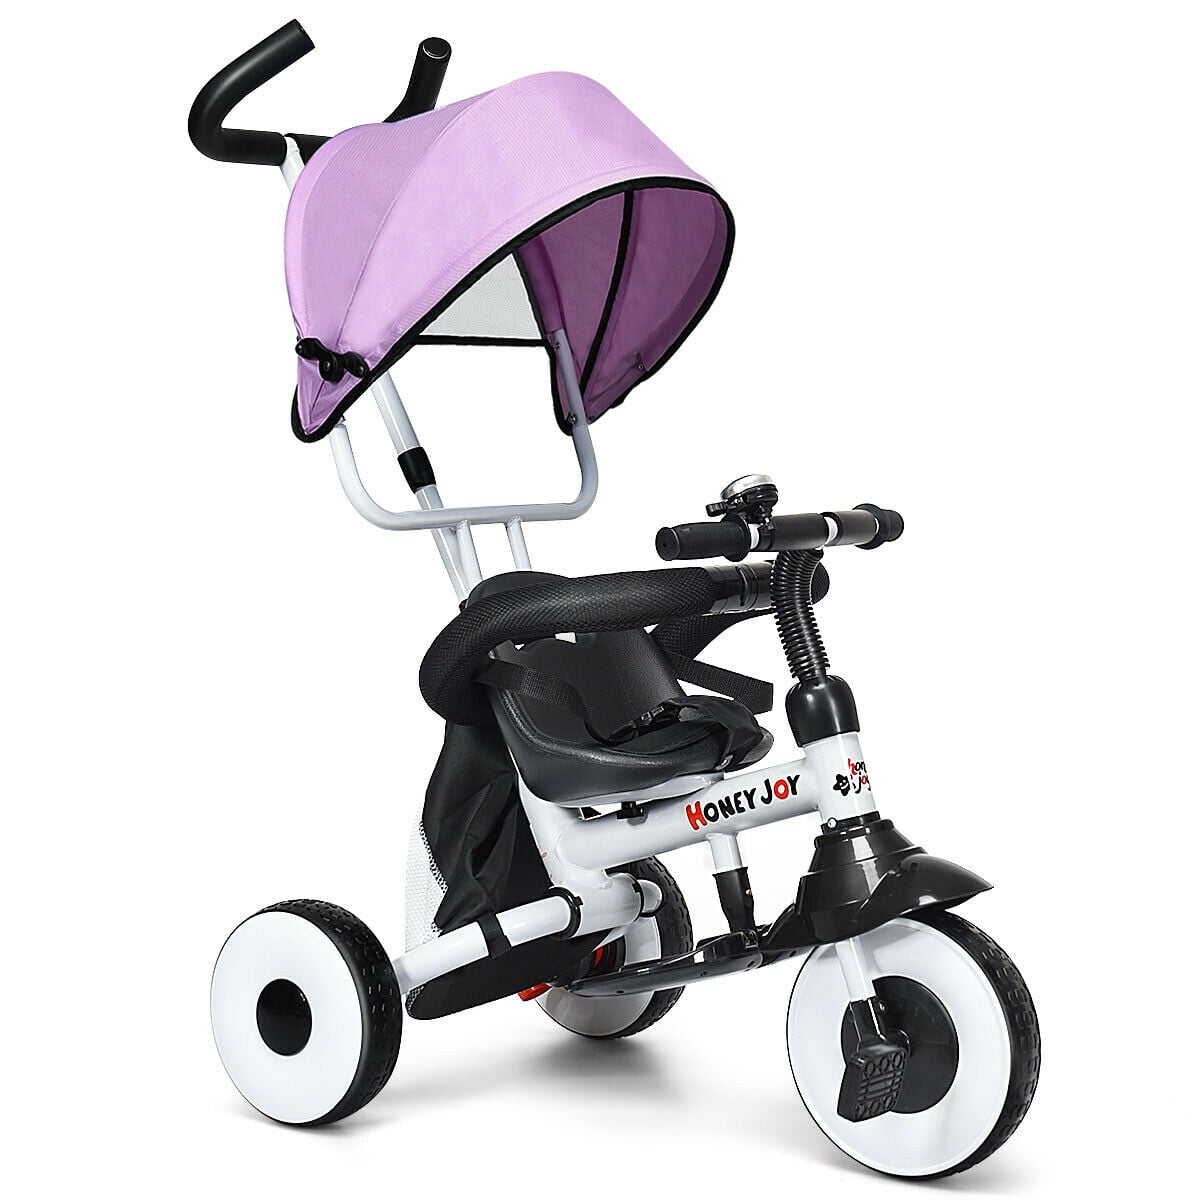 Suge Baby Stroller Portable Baby Carriage Stroller Lightweight-Stroller Foldable Baby Stroller,Stroller with 5 Safe Carrying Positions High View Frame Purple 